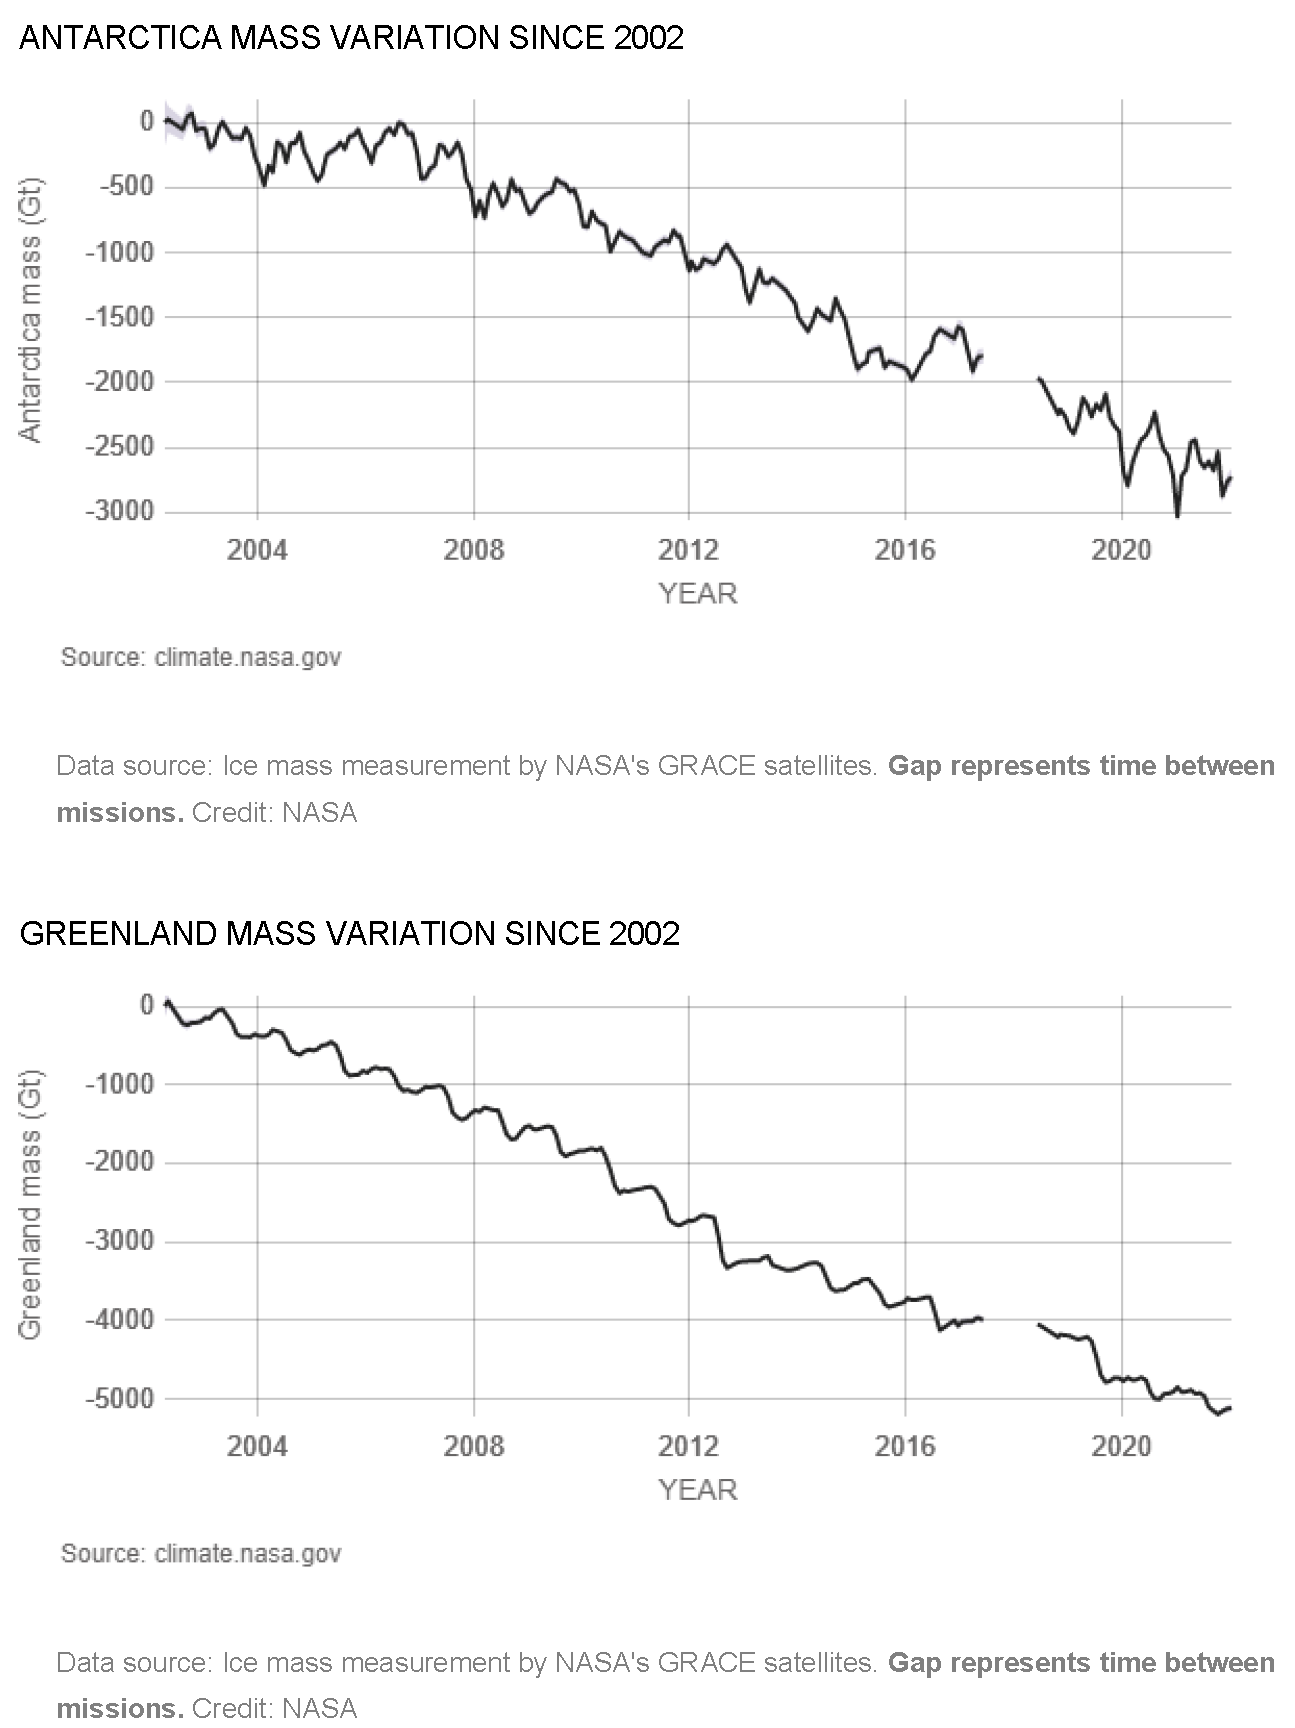 Antarctica and Greenland Ice Mass Variation since April 2002